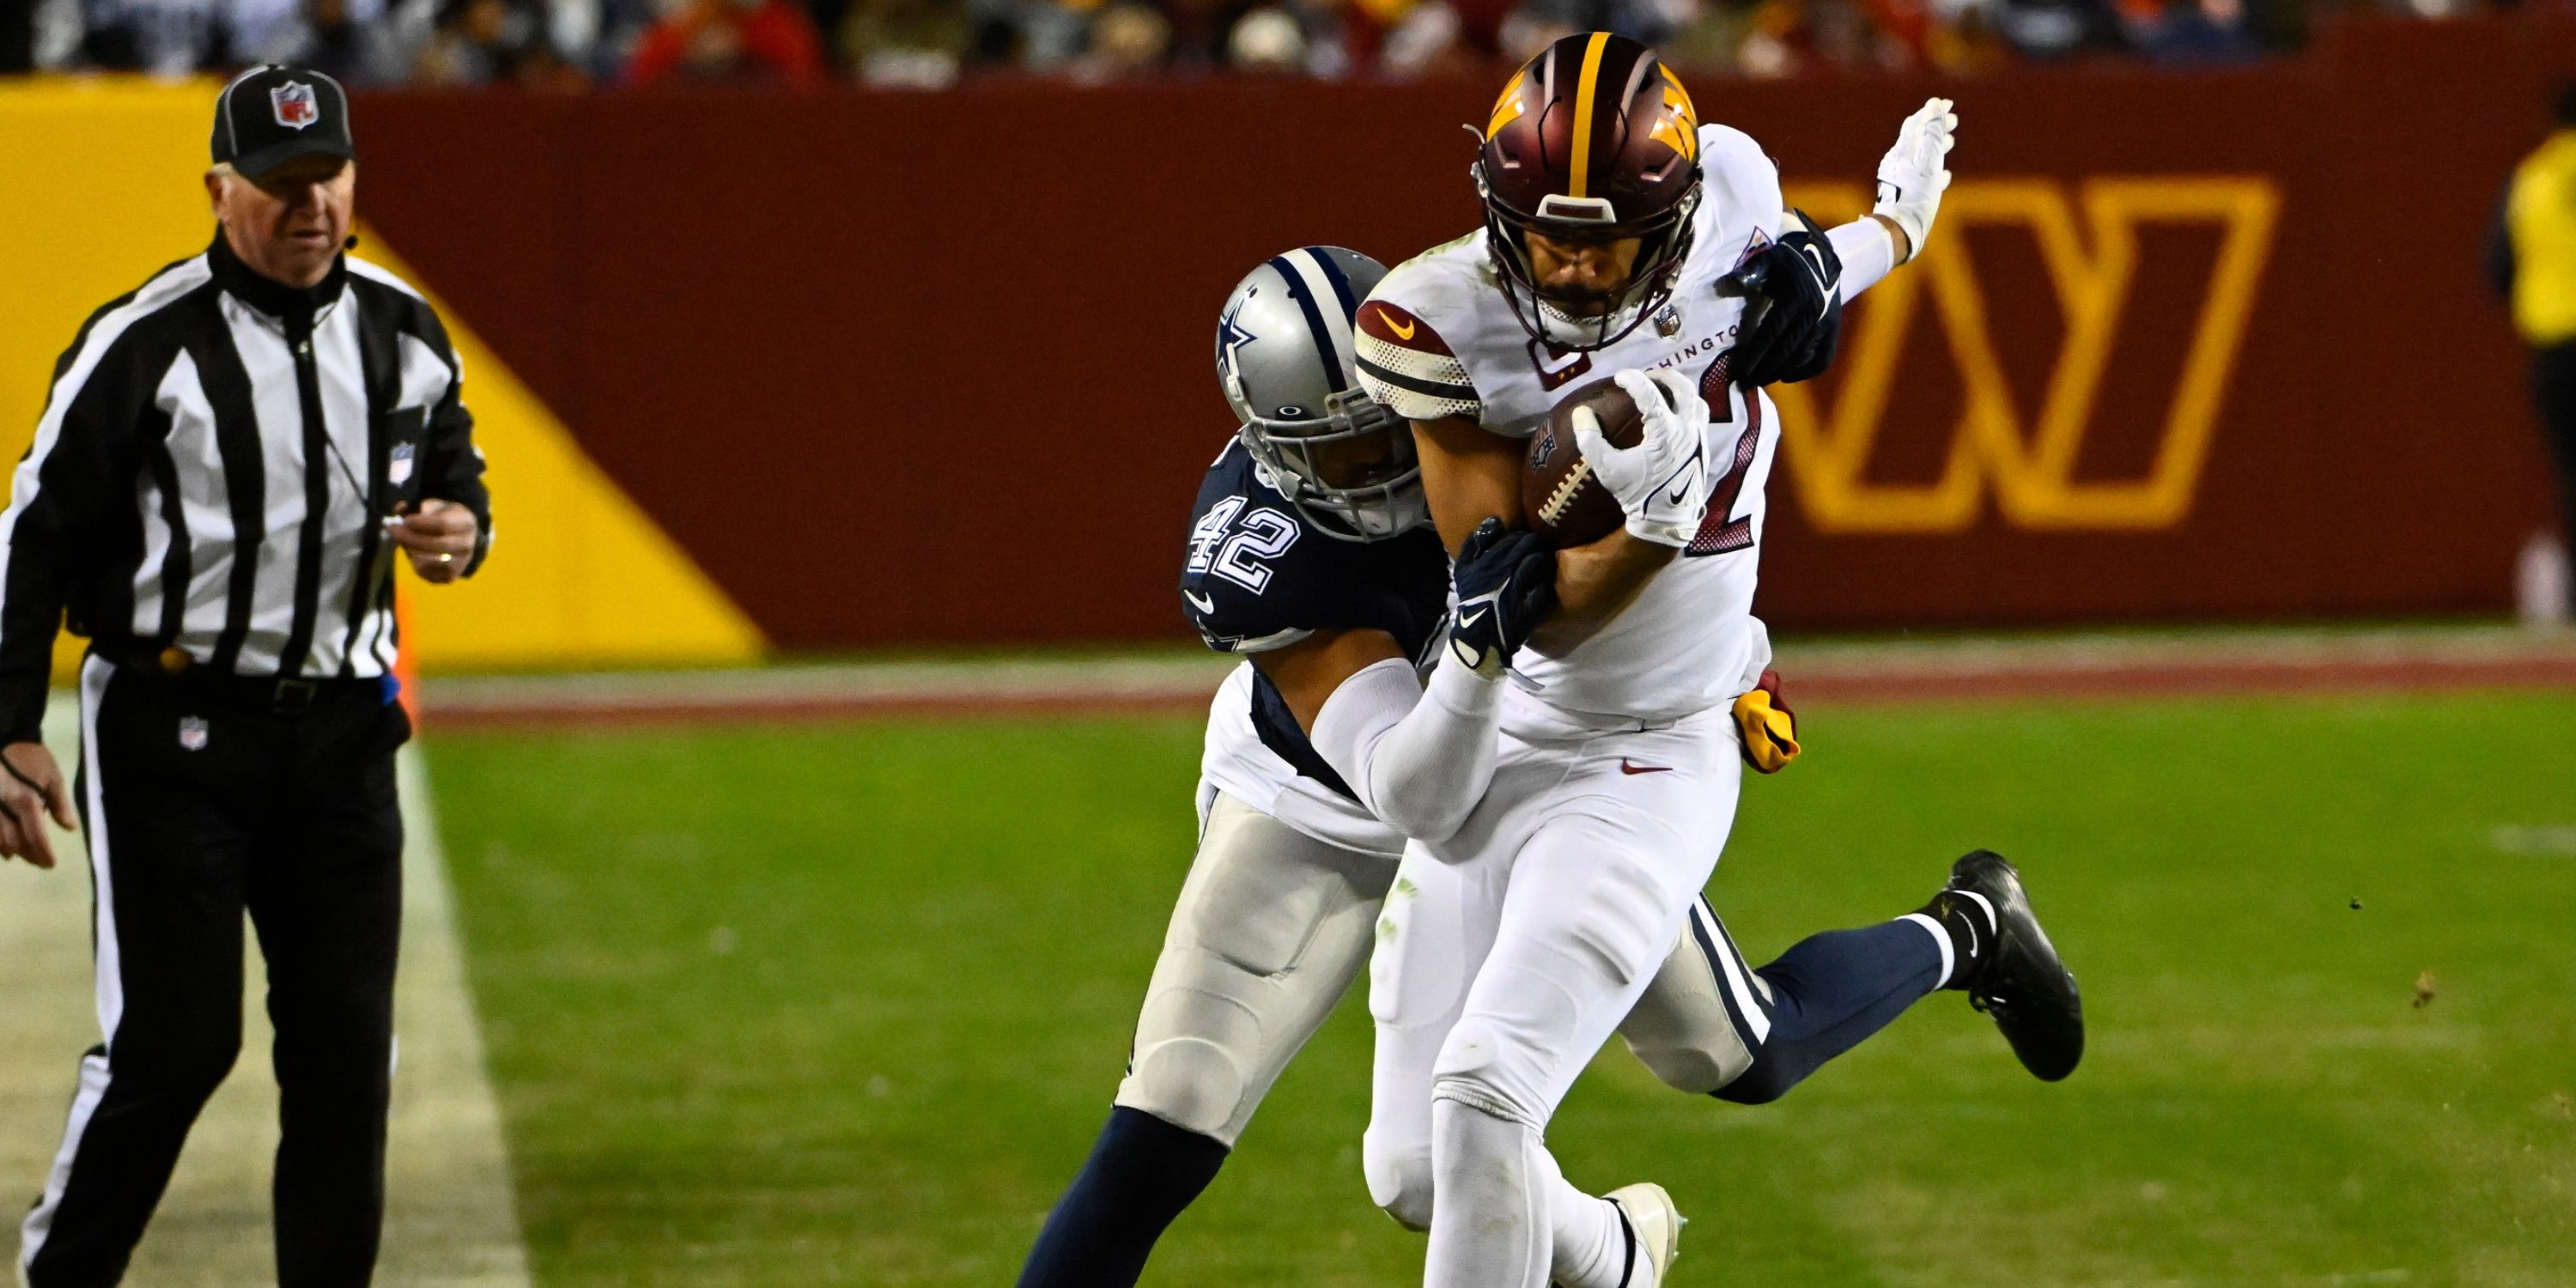 Logan Thomas is tackled after making a catch 